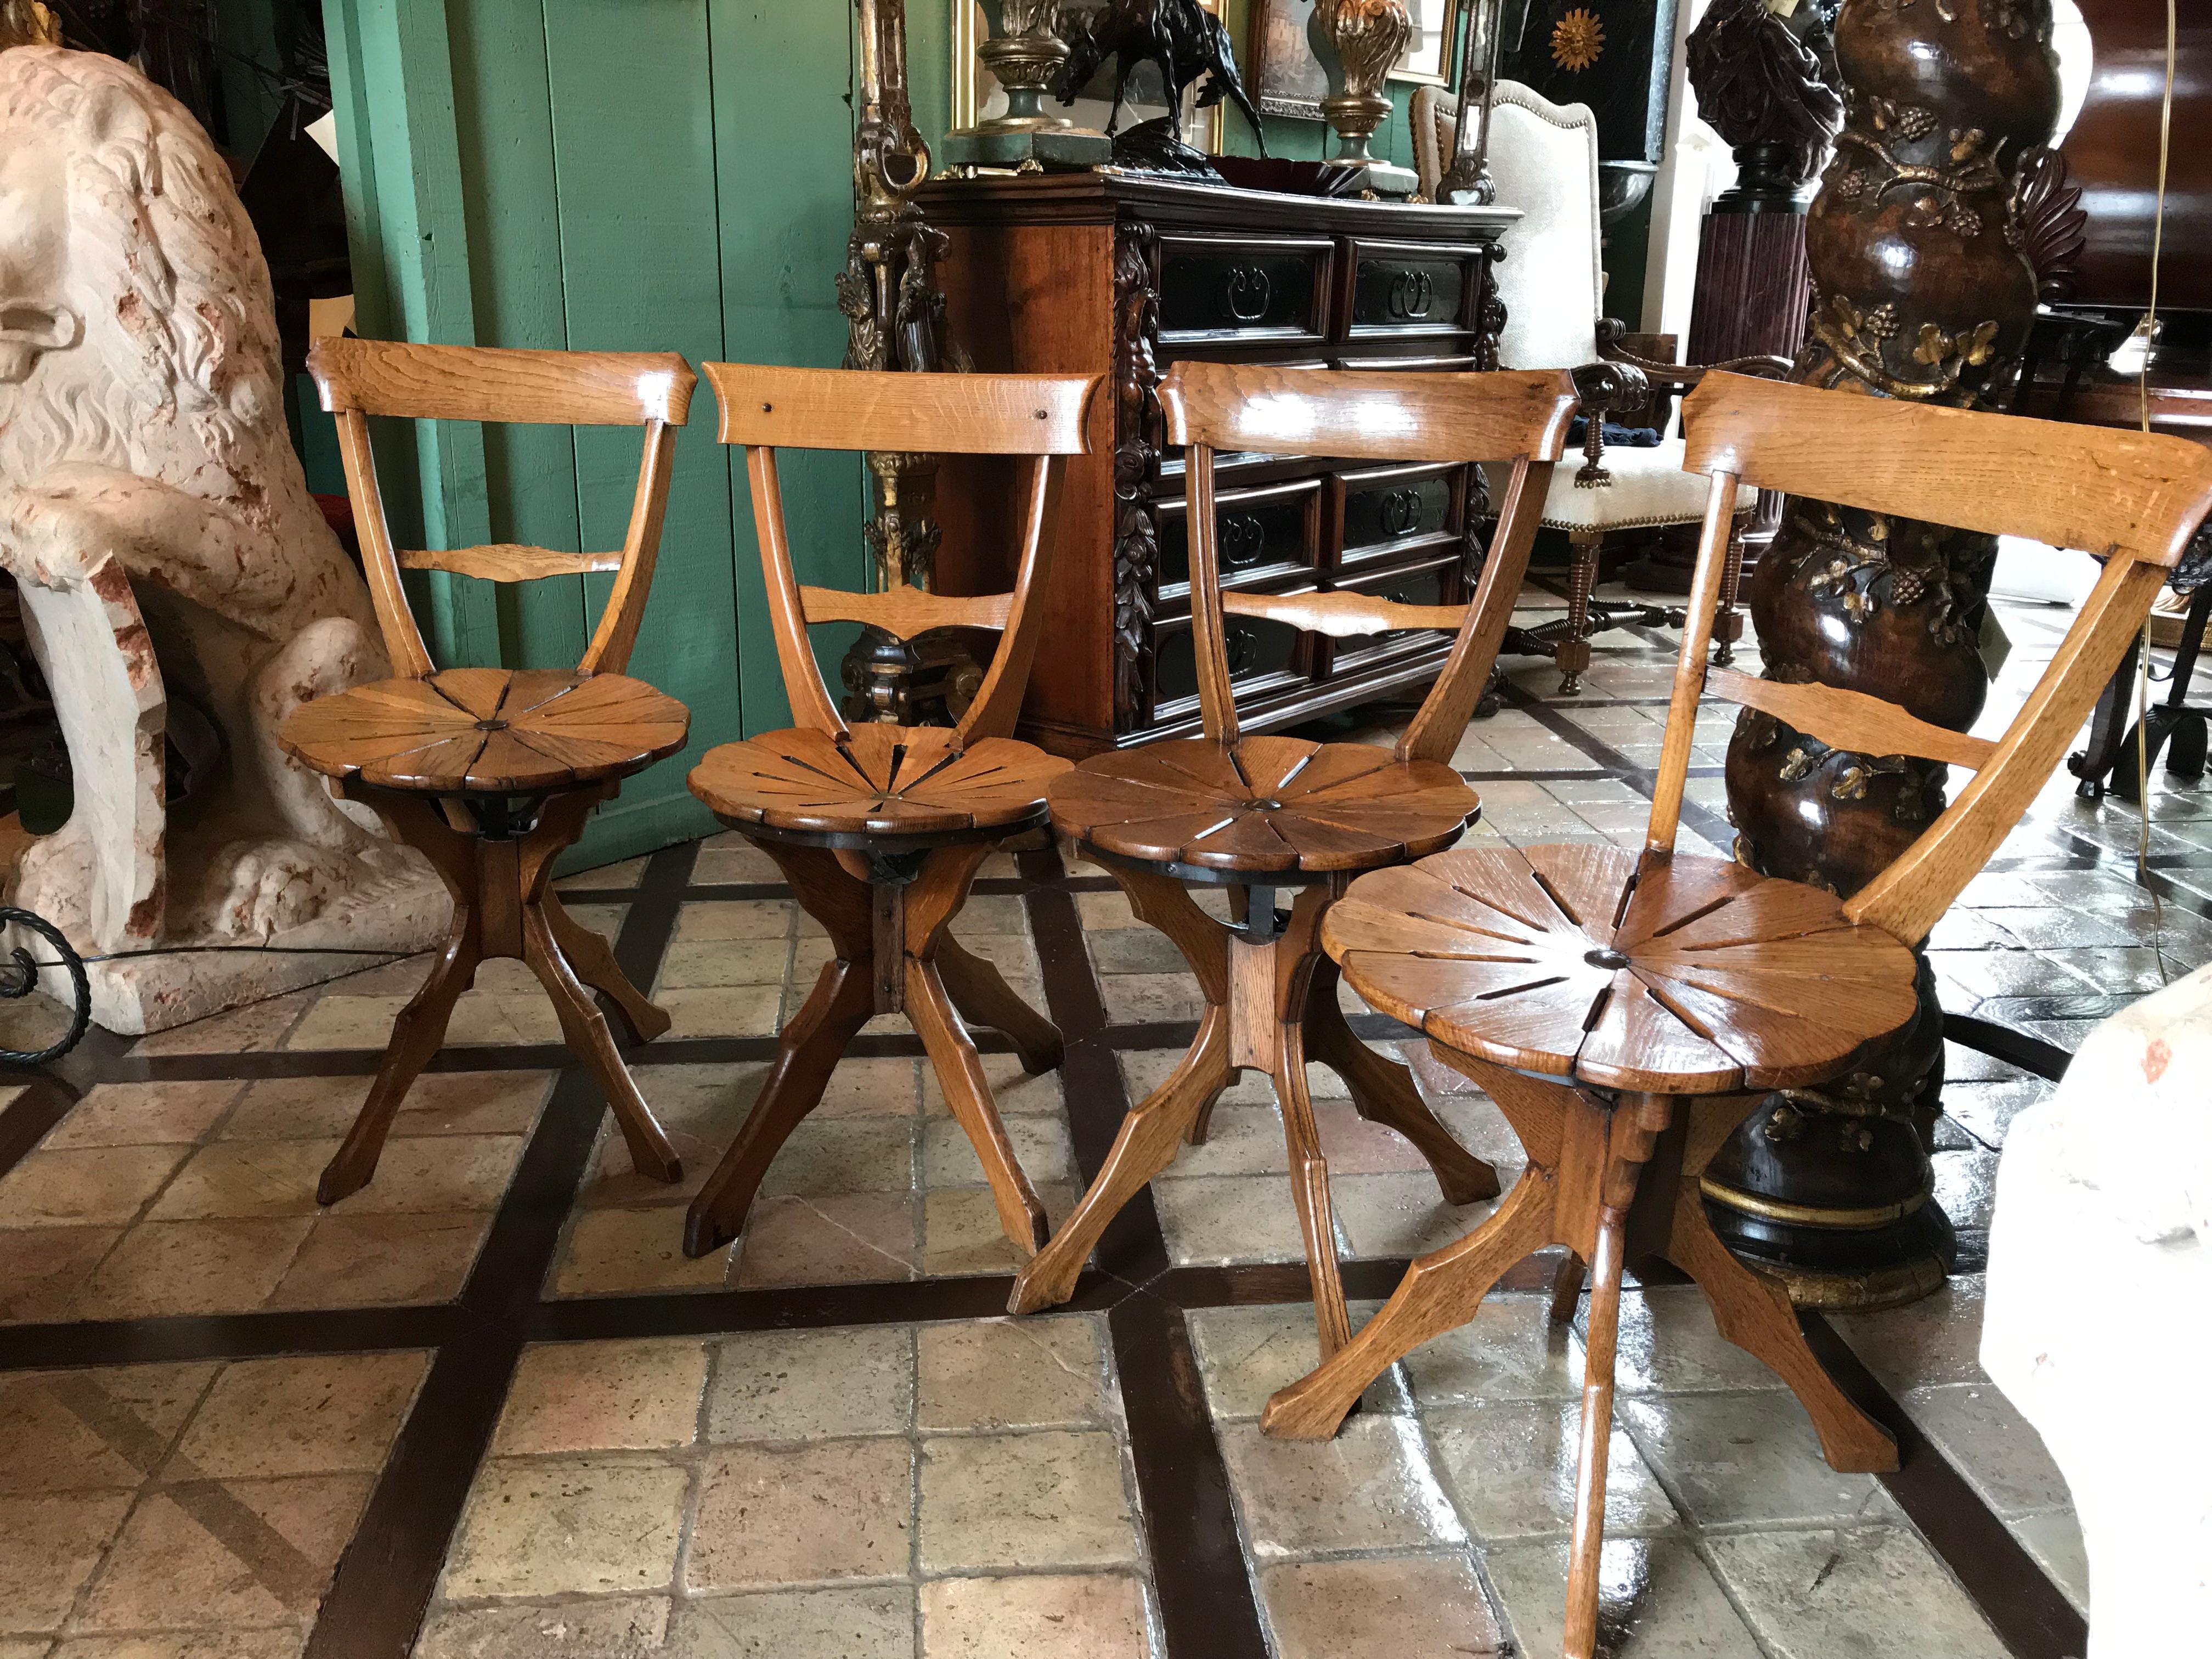 19th Century Garden Patio kitchen Chairs side hallway seats Los Angeles Antiques. Set of six late 19th century Garden Patio chairs. Belle epoque France. ONLY TWO SETS AVAILABLE . The chairs were handmade and carved beautifully and therefore